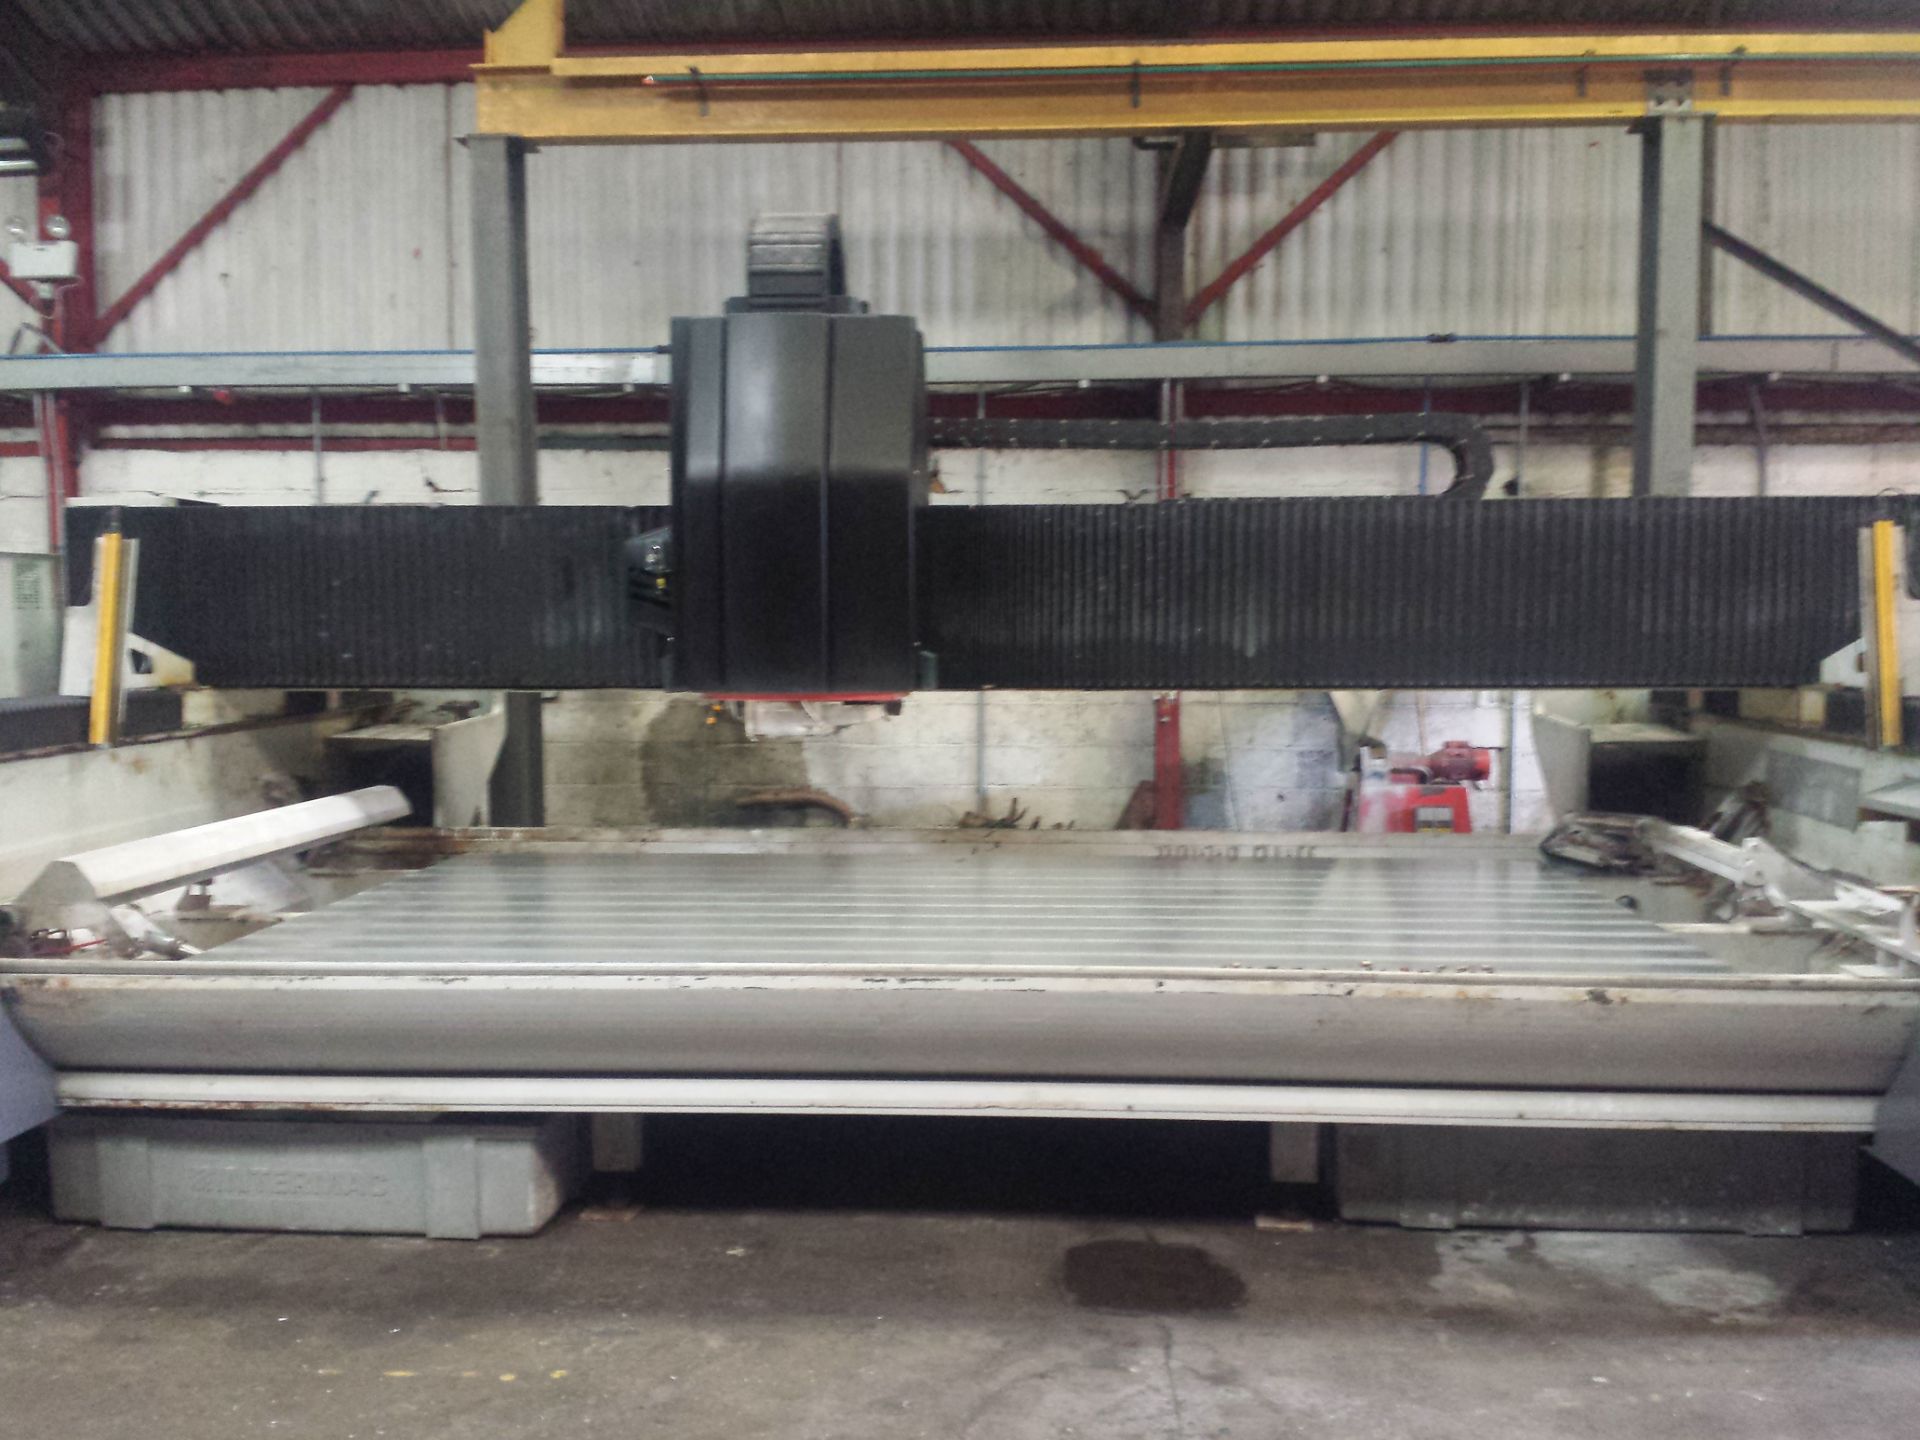 Intermac Pro C, CNC Machining Centre 4000×2000 Bed Size with S10 Numerical Control Unit, Serial - Image 4 of 5